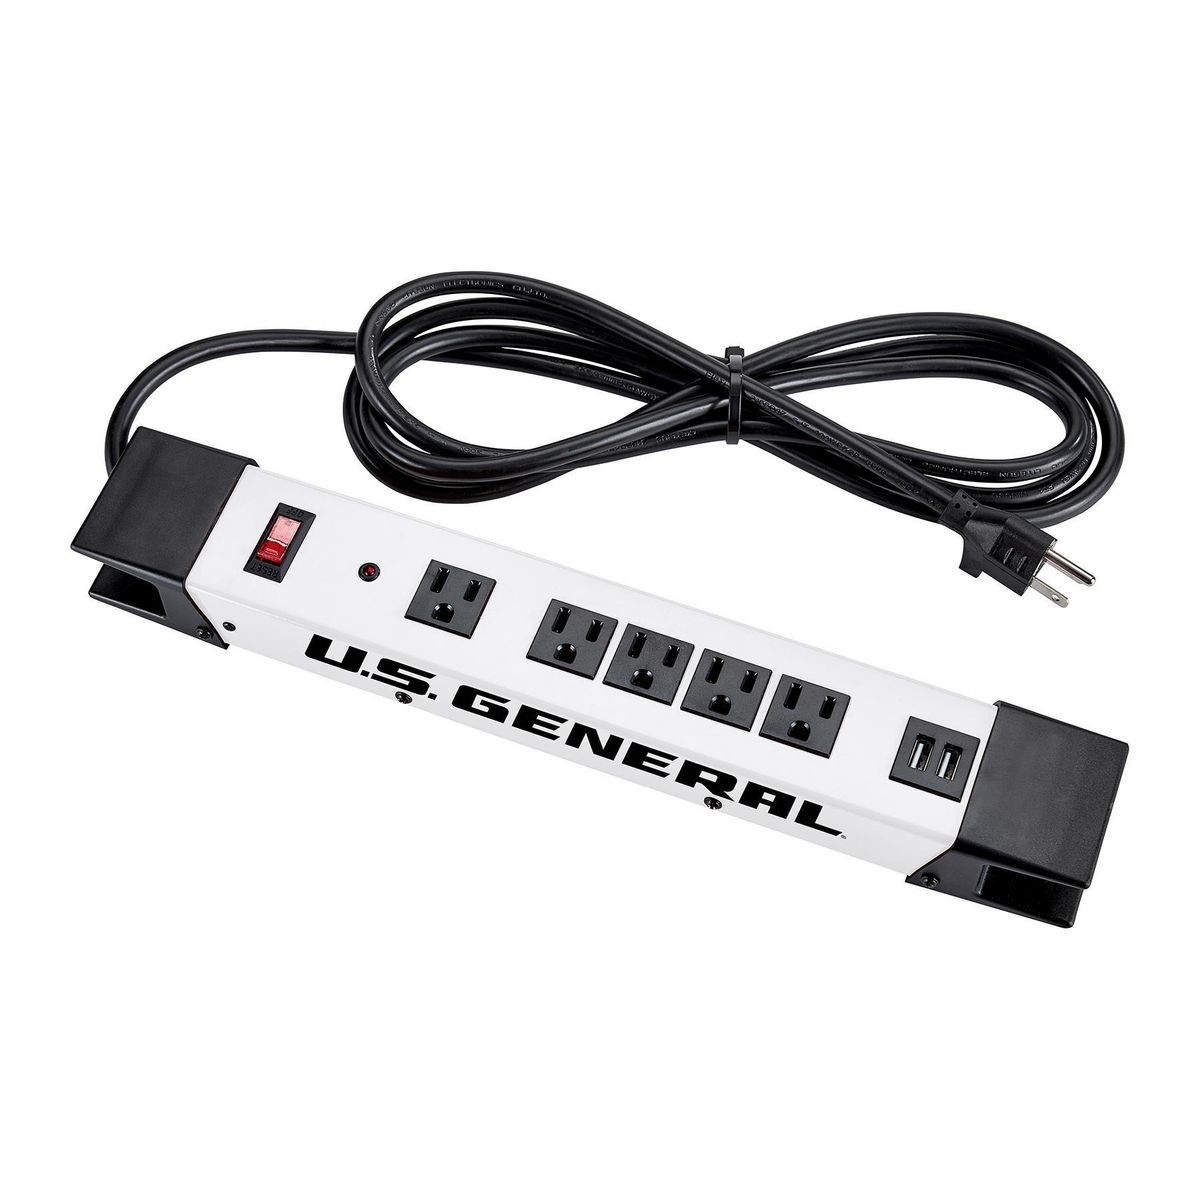 U.S. GENERAL 5 Outlet Magnetic Power Strip With Metal Housing And 2 USB Ports – White – Item 57256